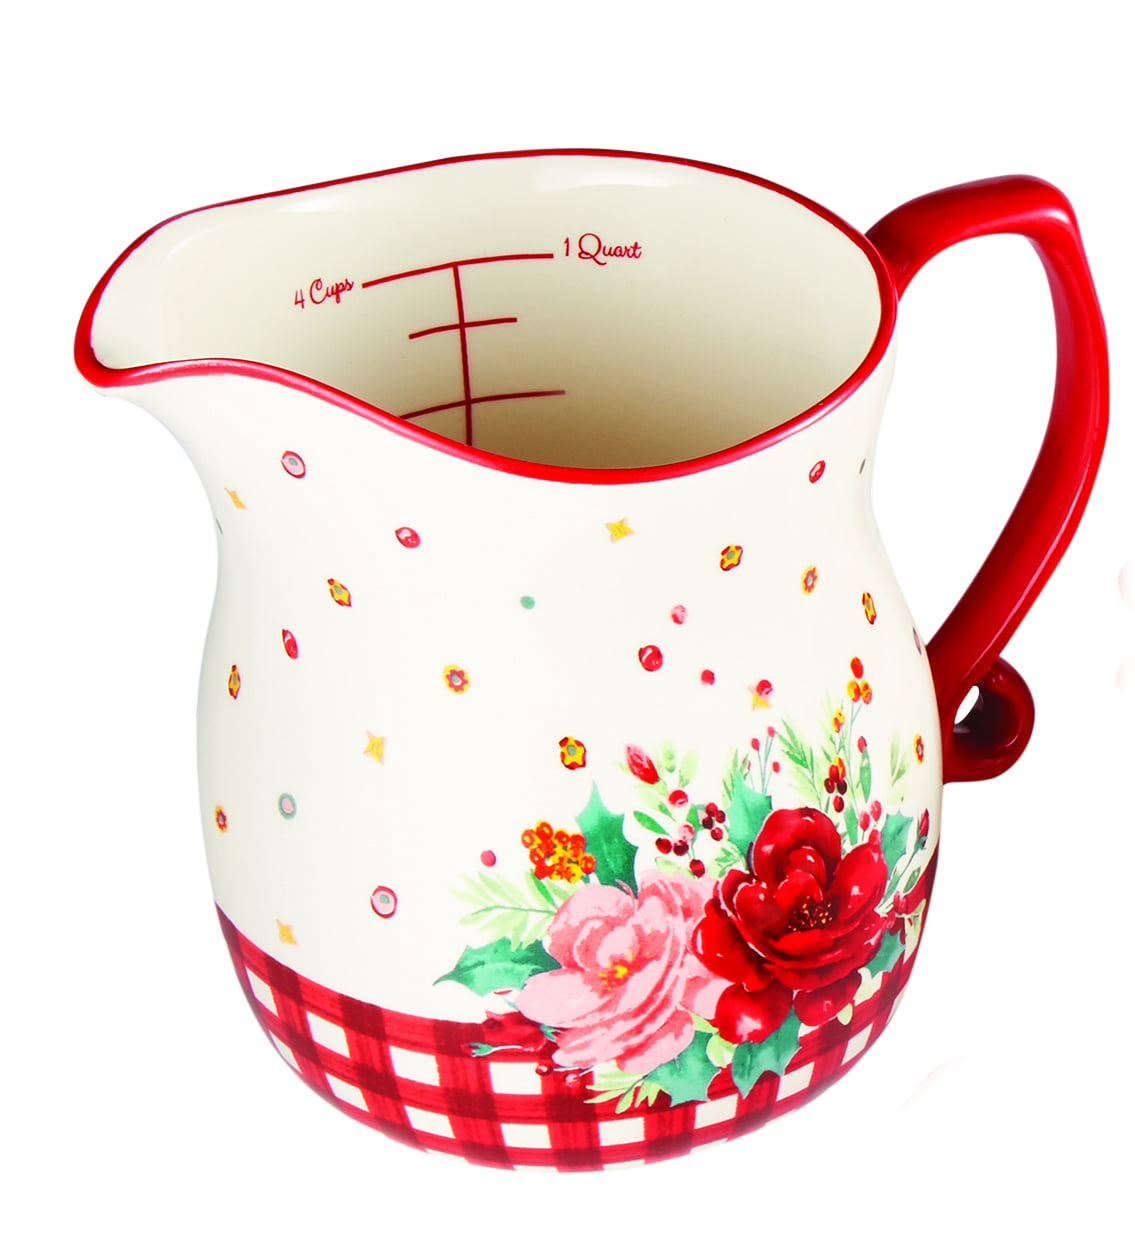 The Pioneer Woman Cheerful Rose 9-Piece Measuring Set 